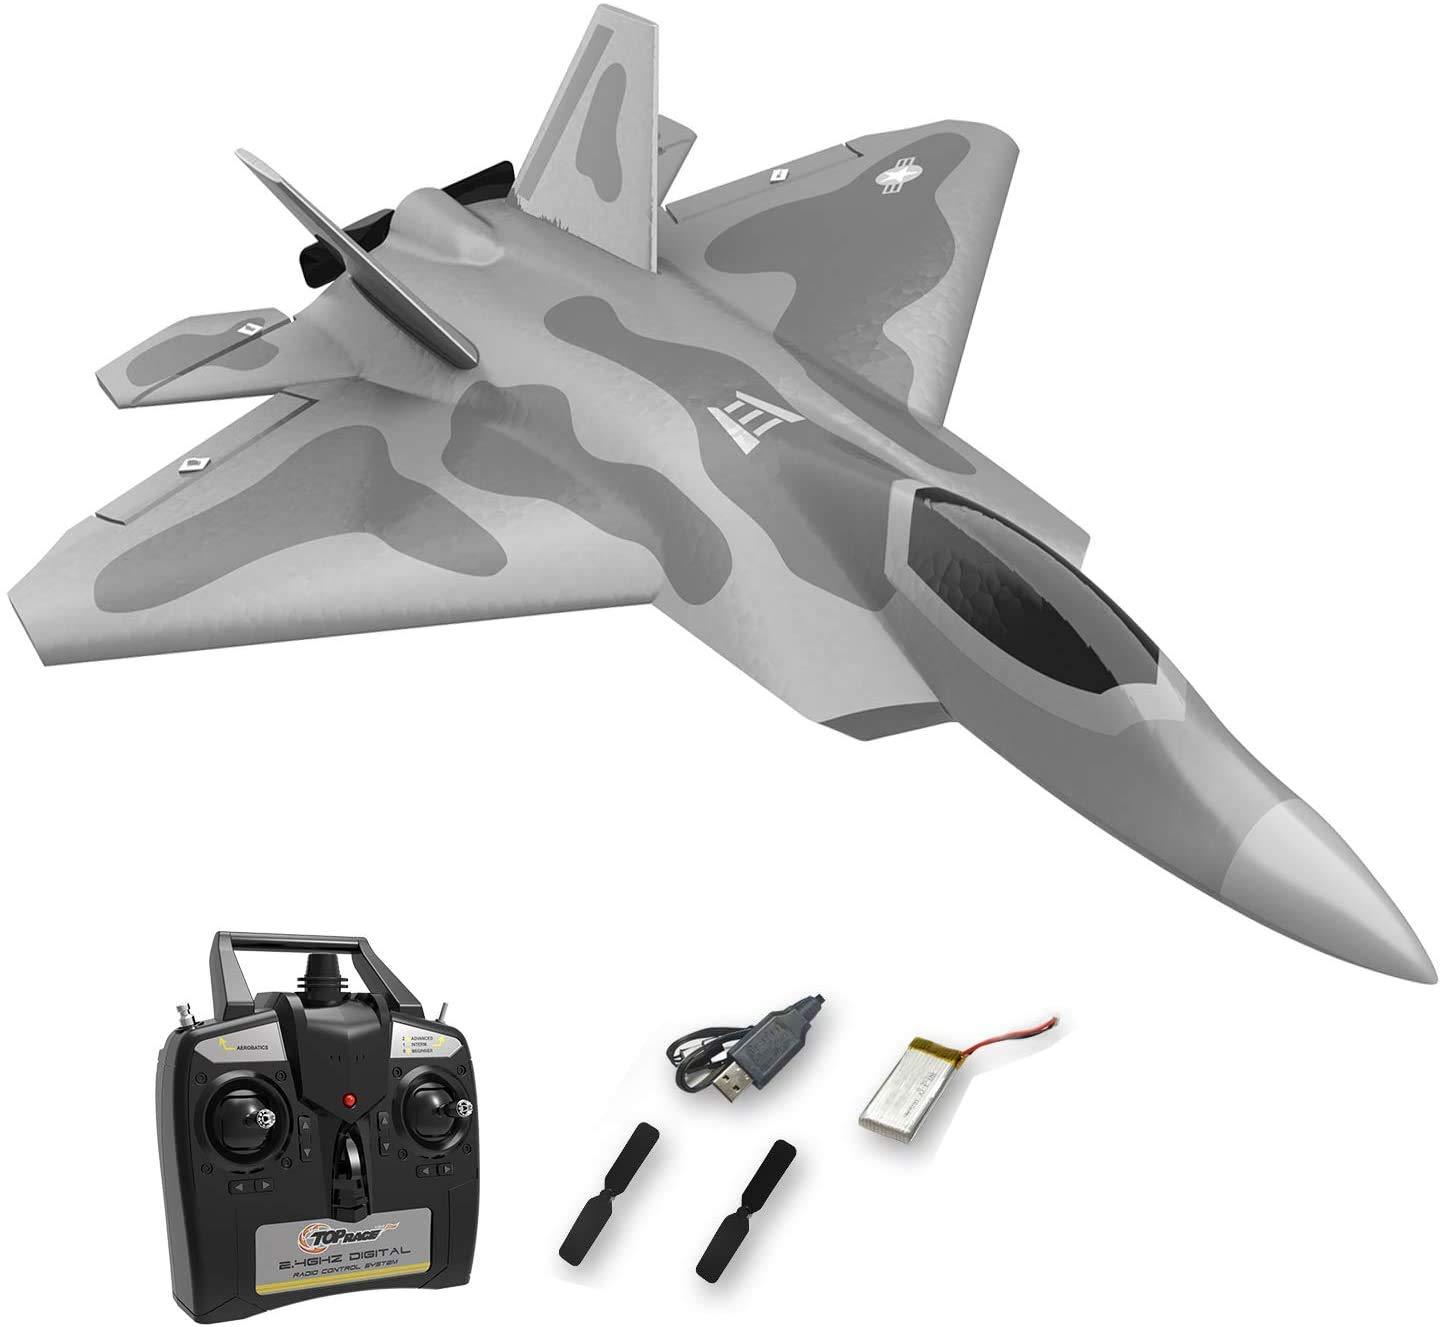 Remote Control Plane Fighter: Pros and Cons of Remote Control Plane Fighters